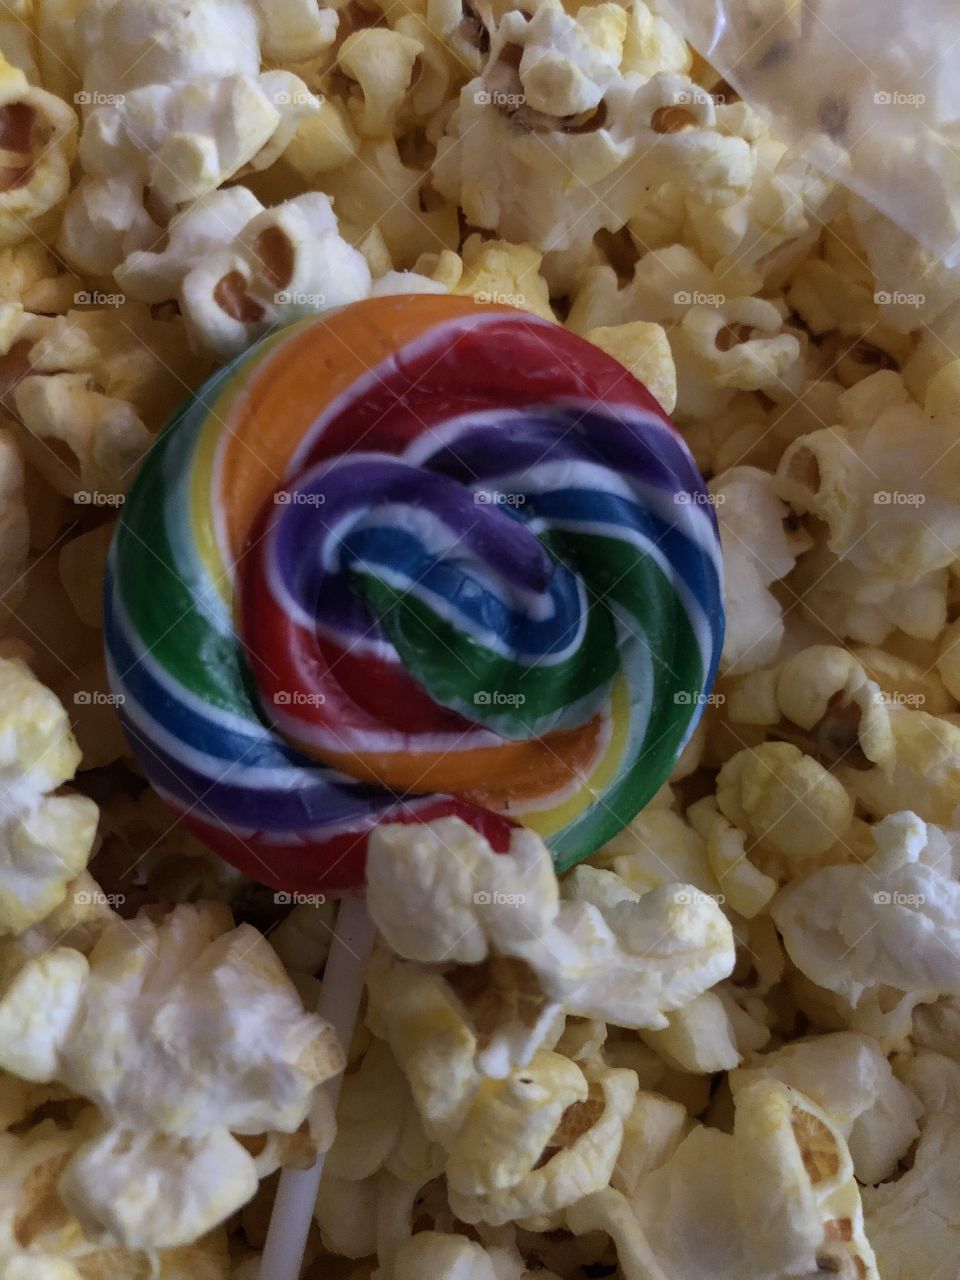 Candy and pop corn